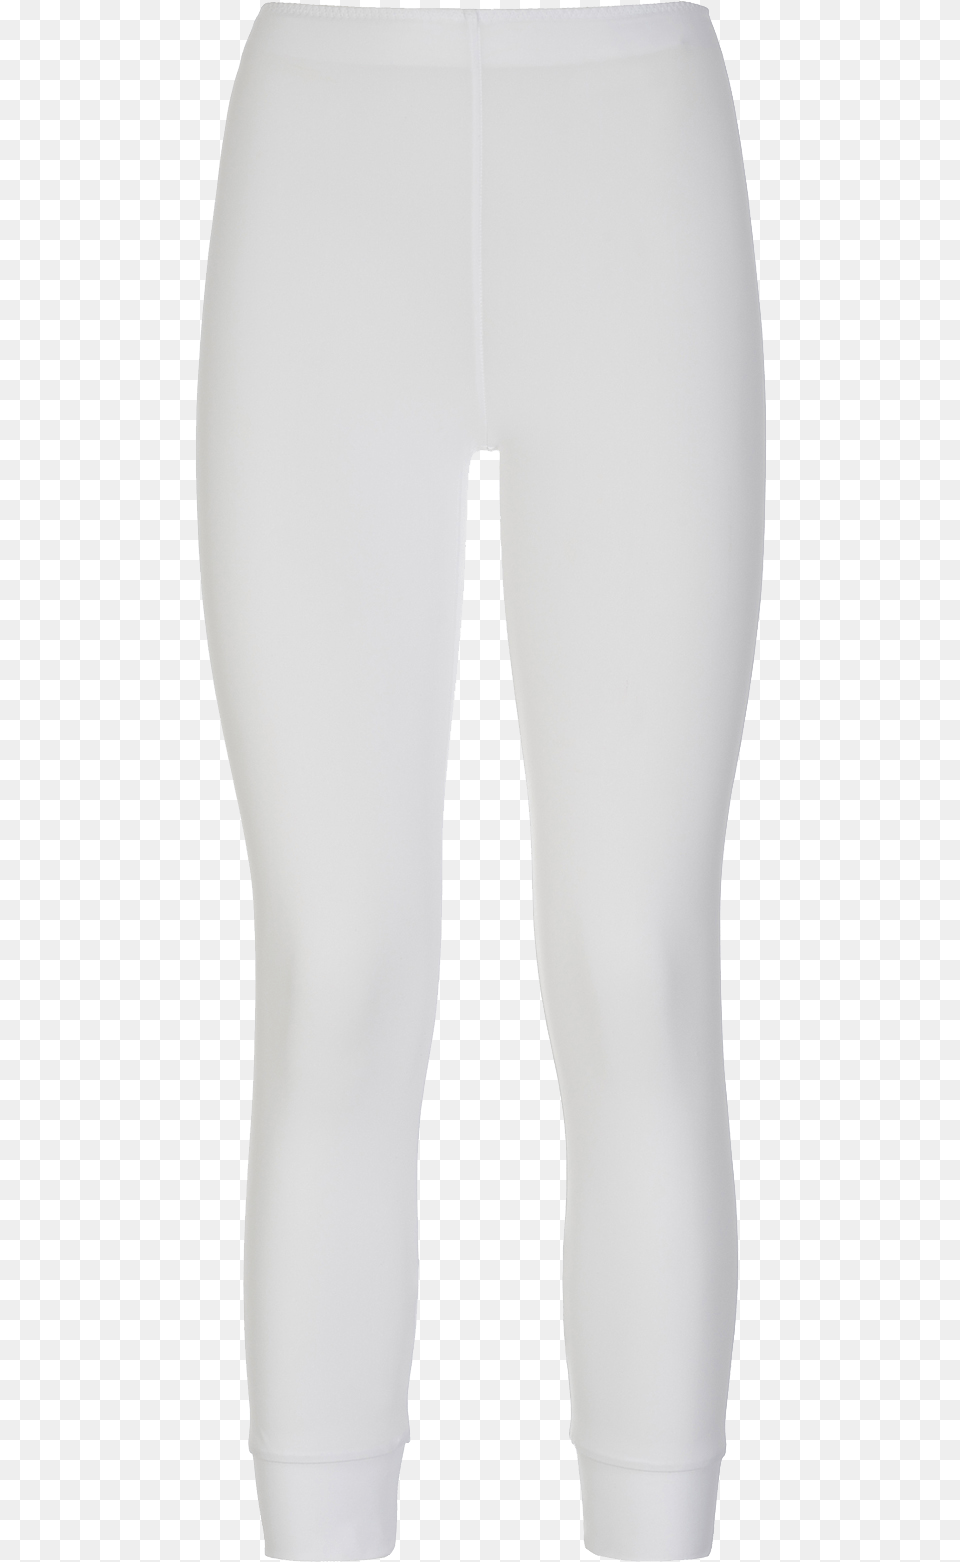 Elisabetta Franchi Leather Pants, Clothing, Hosiery, Tights Png